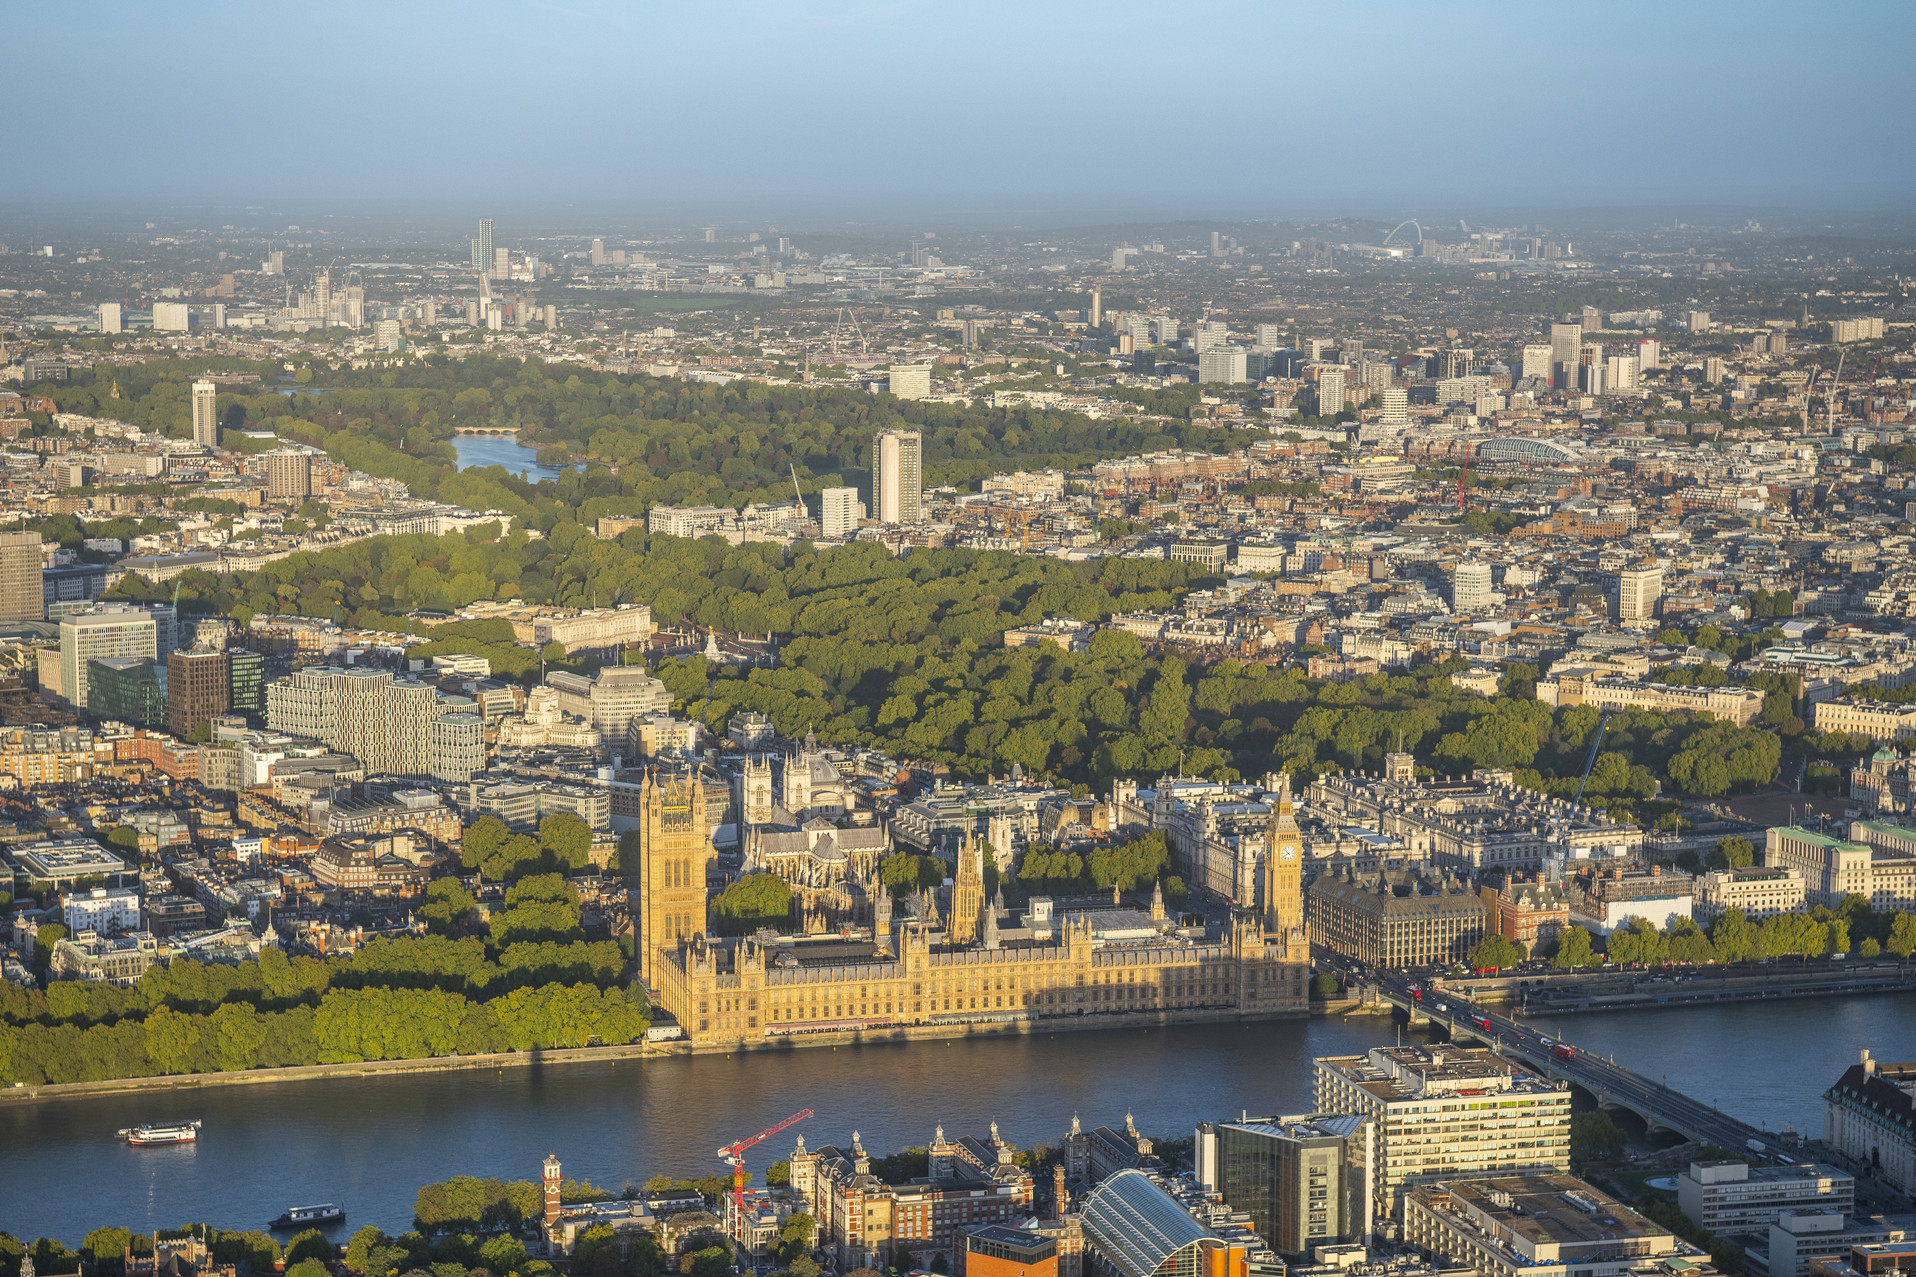 Aerial photo of several Royal Parks, from above the Thames